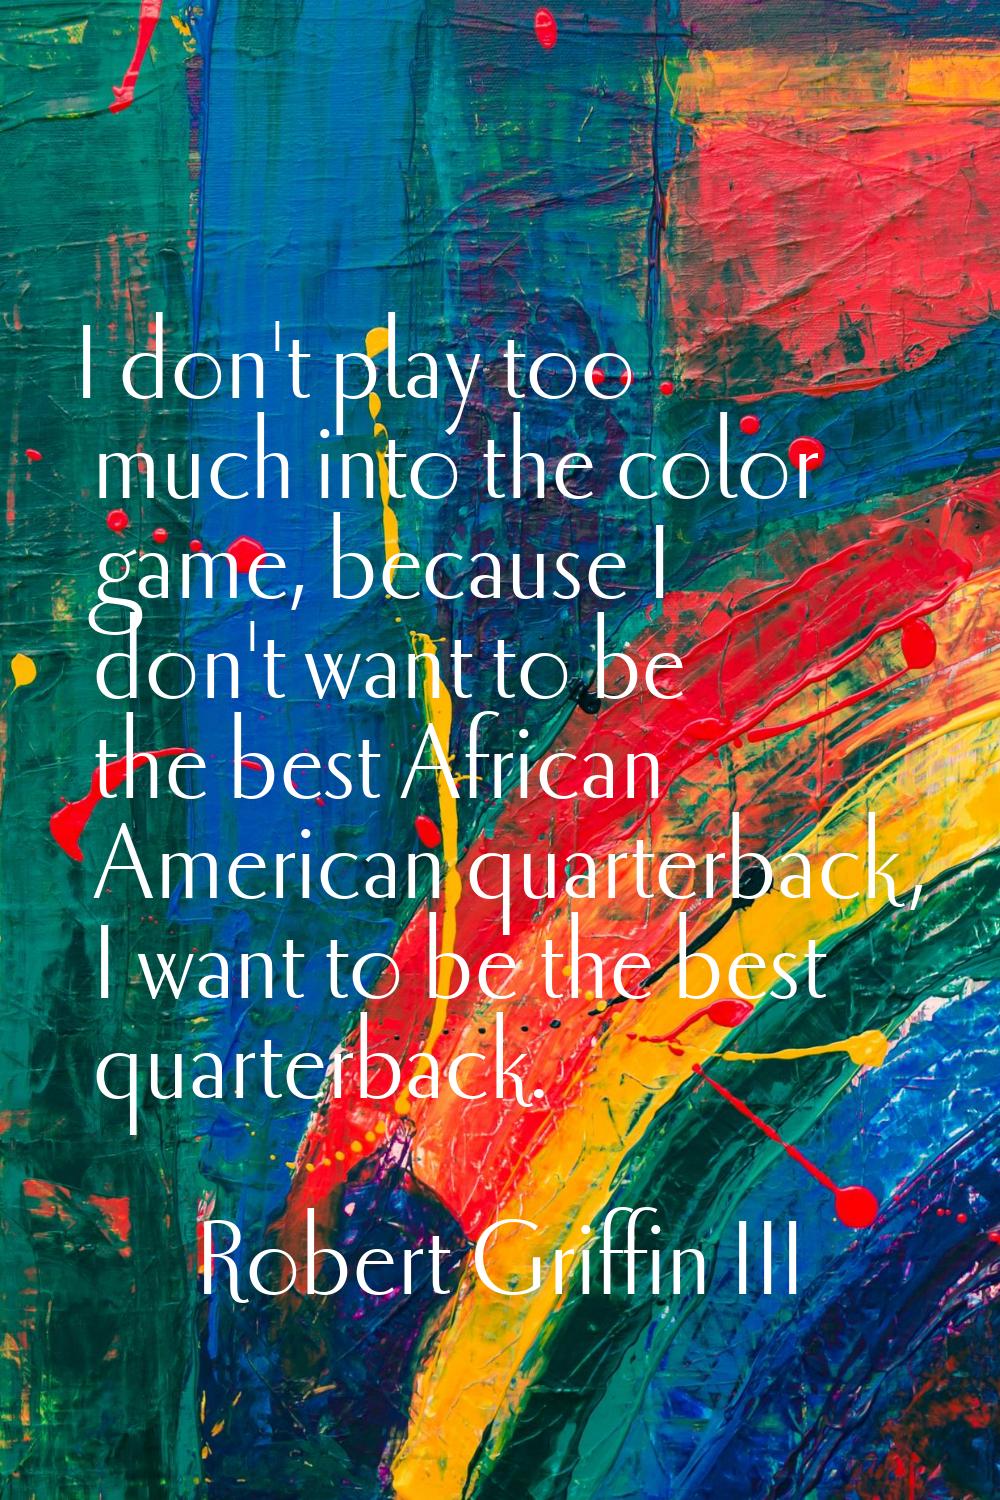 I don't play too much into the color game, because I don't want to be the best African American qua